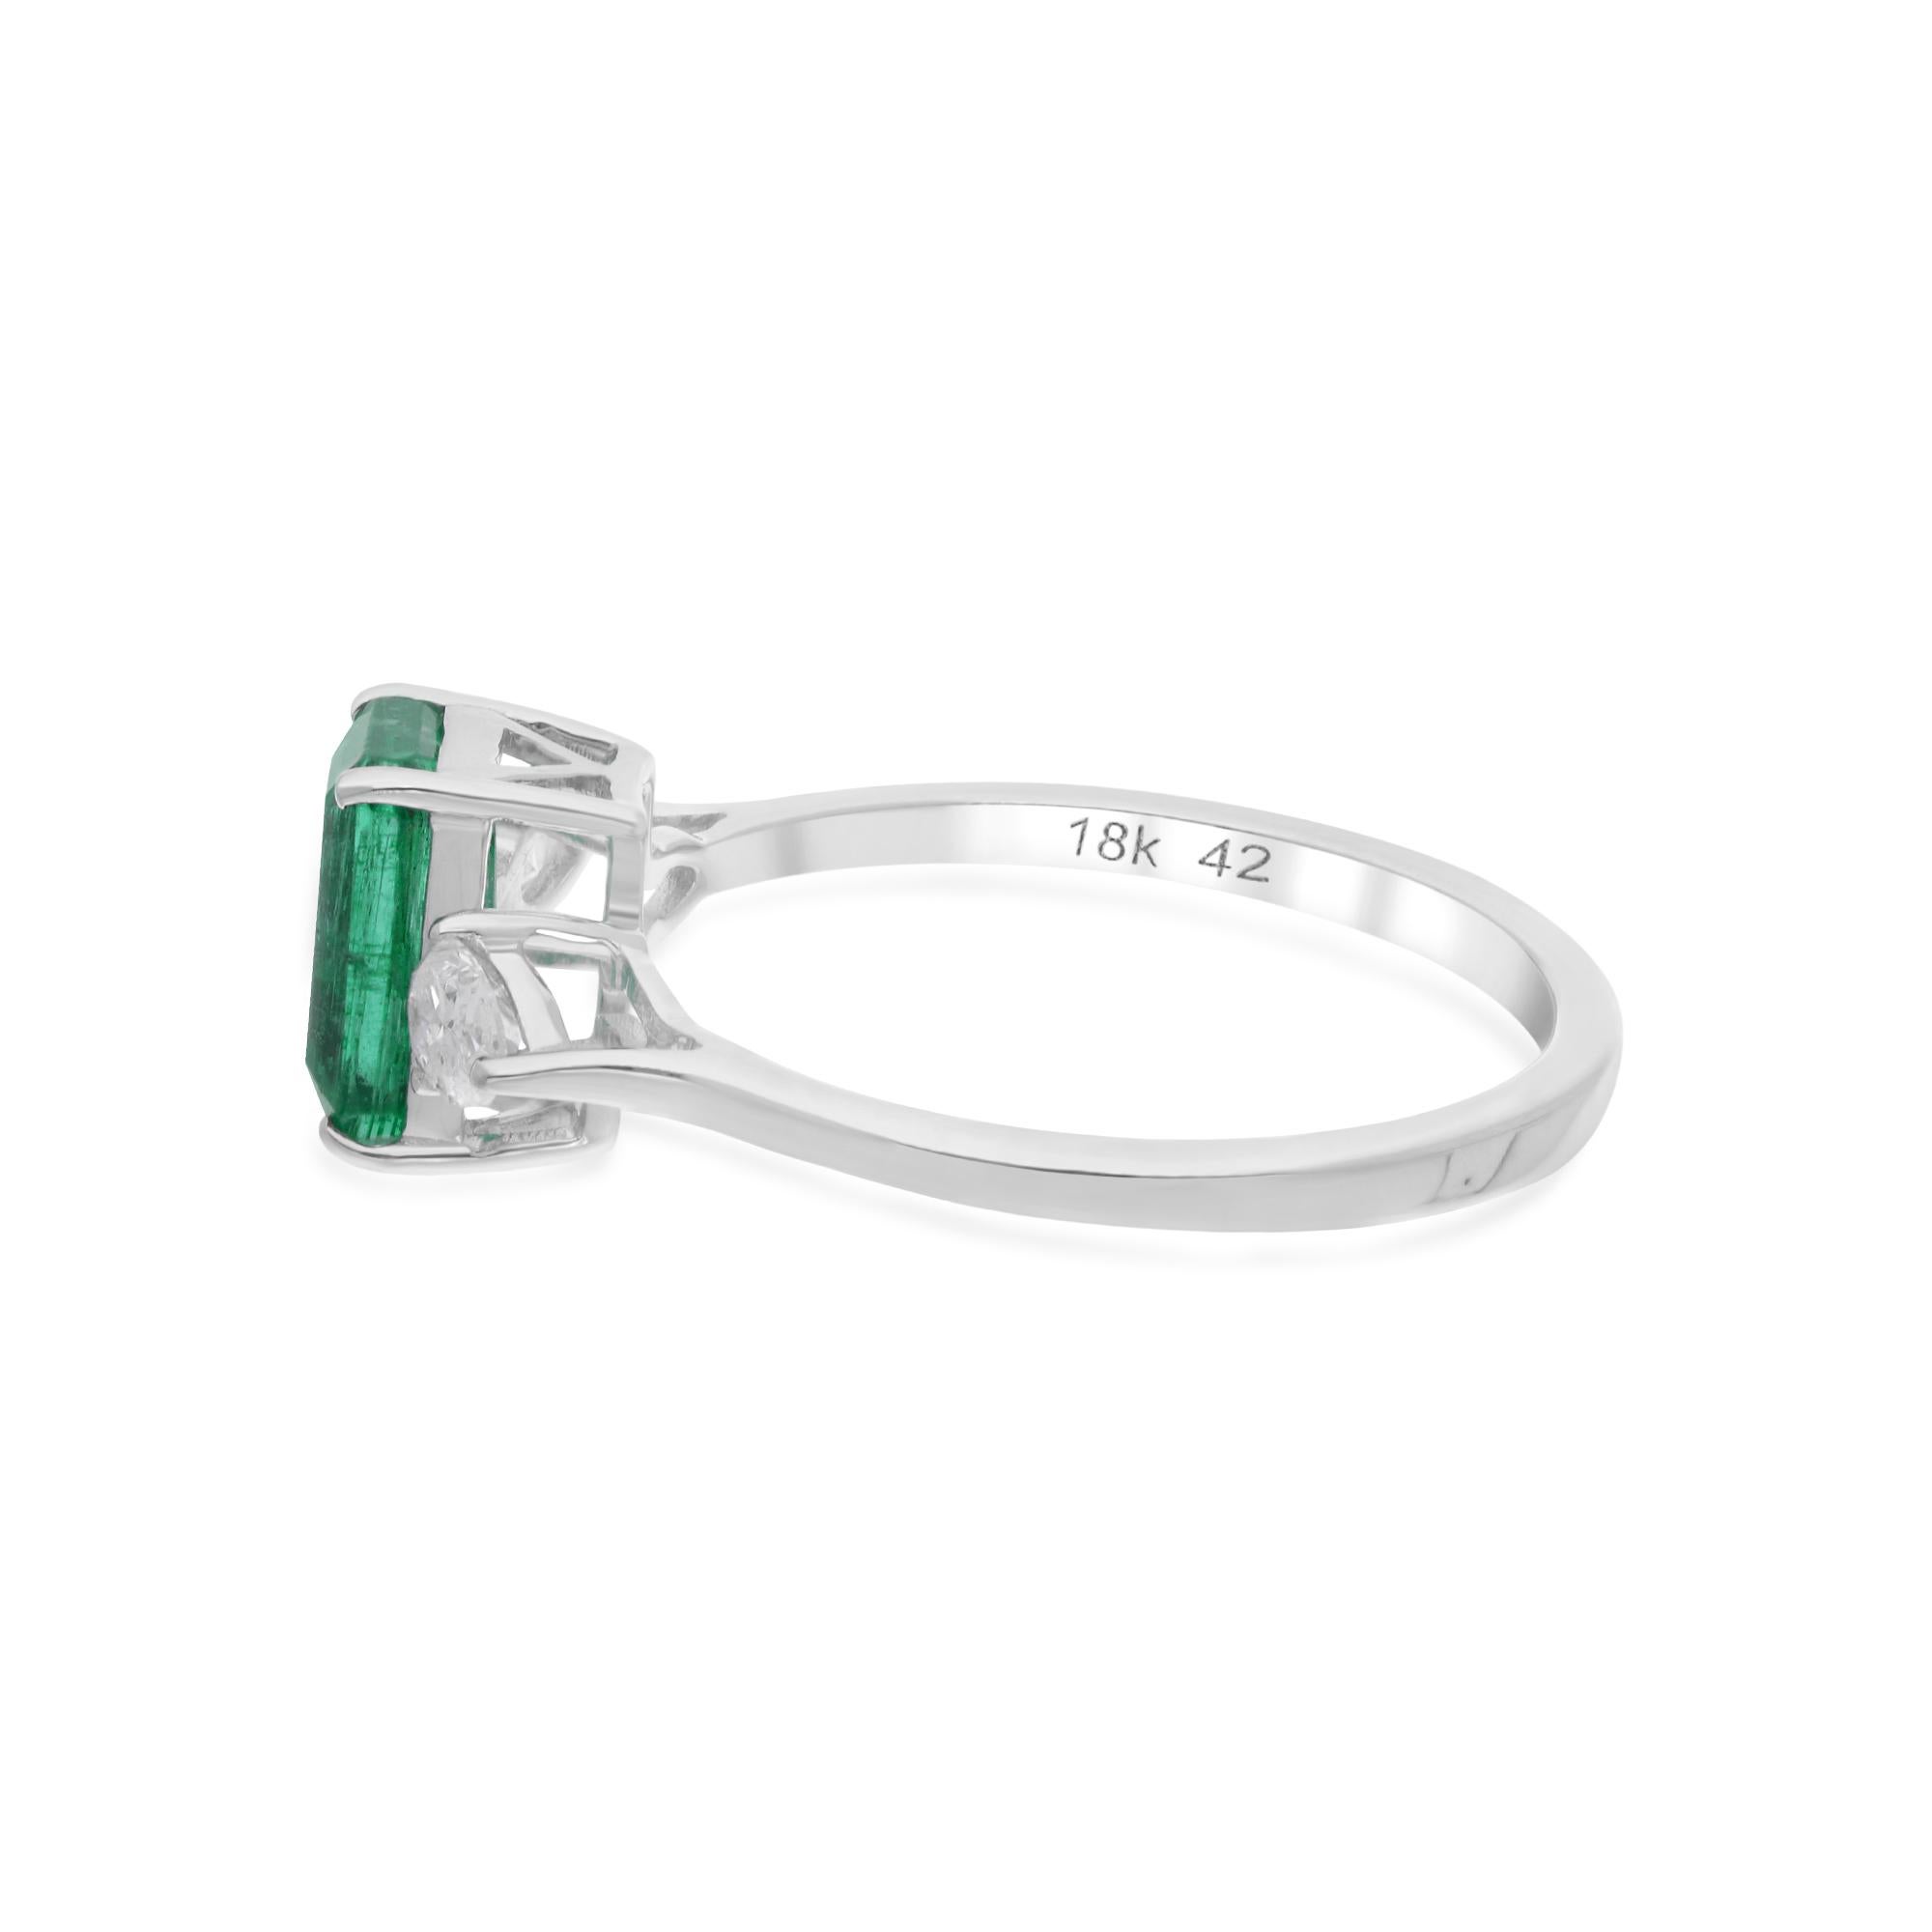 At the center of the ring glimmers a mesmerizing Zambian emerald gemstone, prized for its vivid green hue and exceptional clarity. Sourced from the prestigious mines of Zambia, each emerald exudes a natural beauty and allure that captivates the eye.